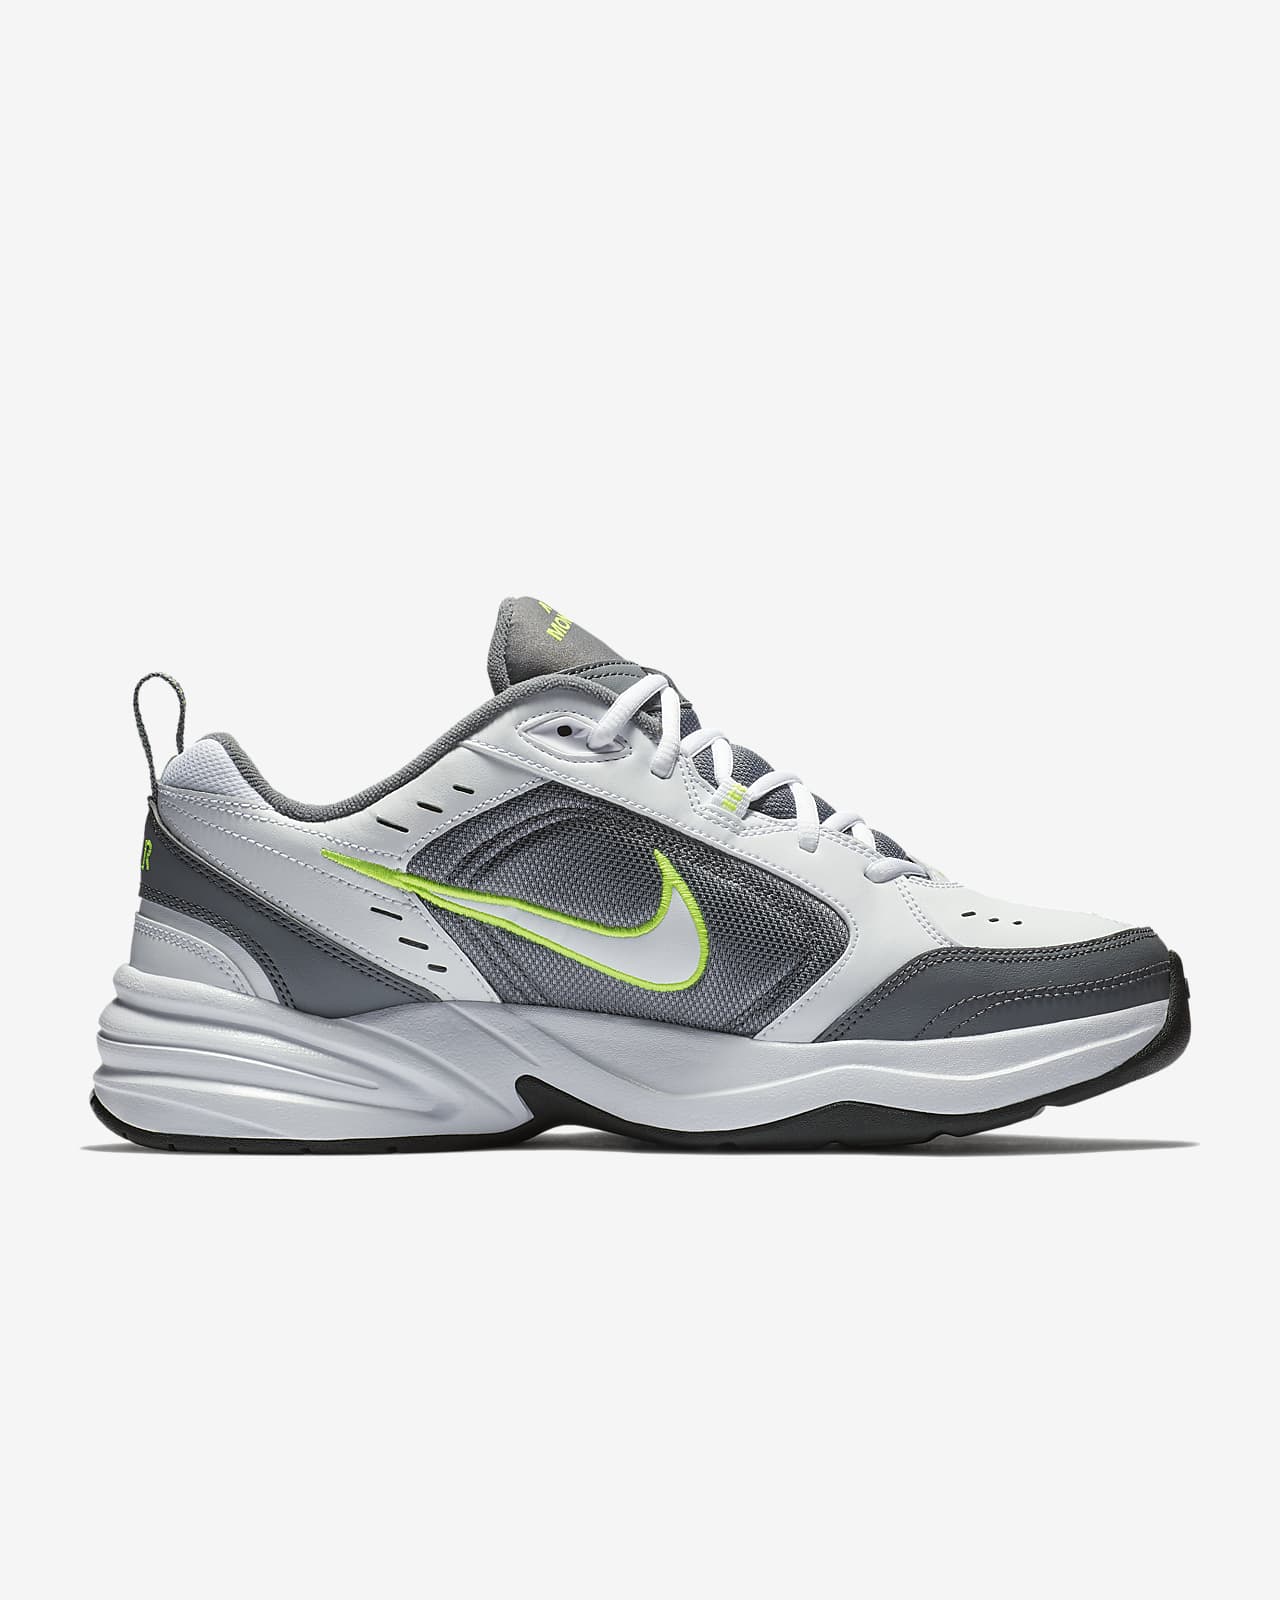 nike air monarch uncle 3000s